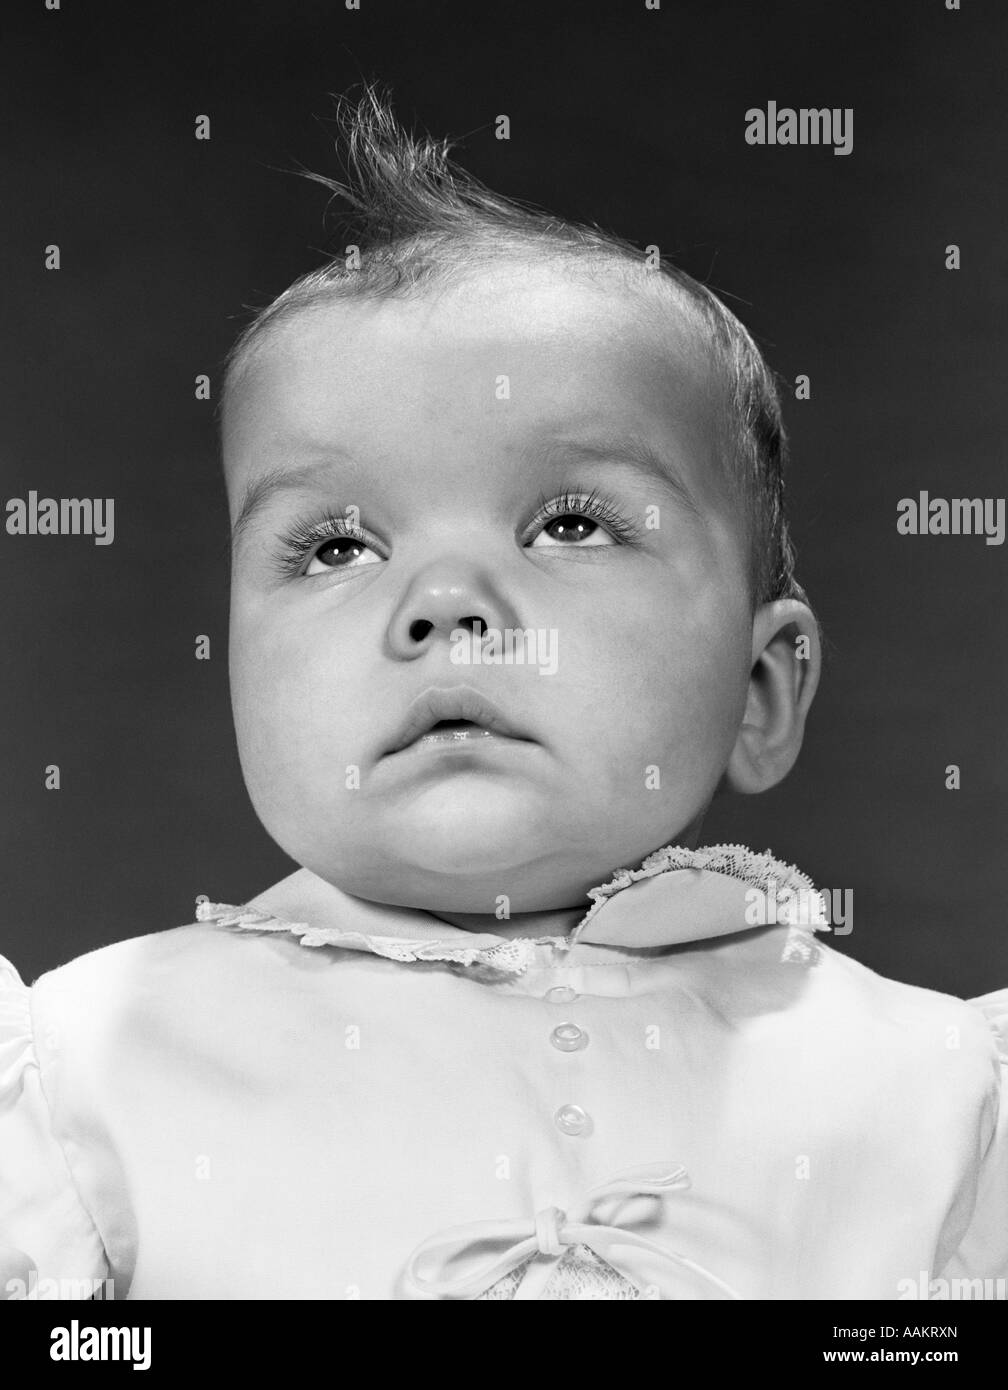 BABY PORTRAIT WEAR DRESS BUTTONS BOW COLLAR FACE EXPRESSION ABOUT TO CRY SAD Stock Photo